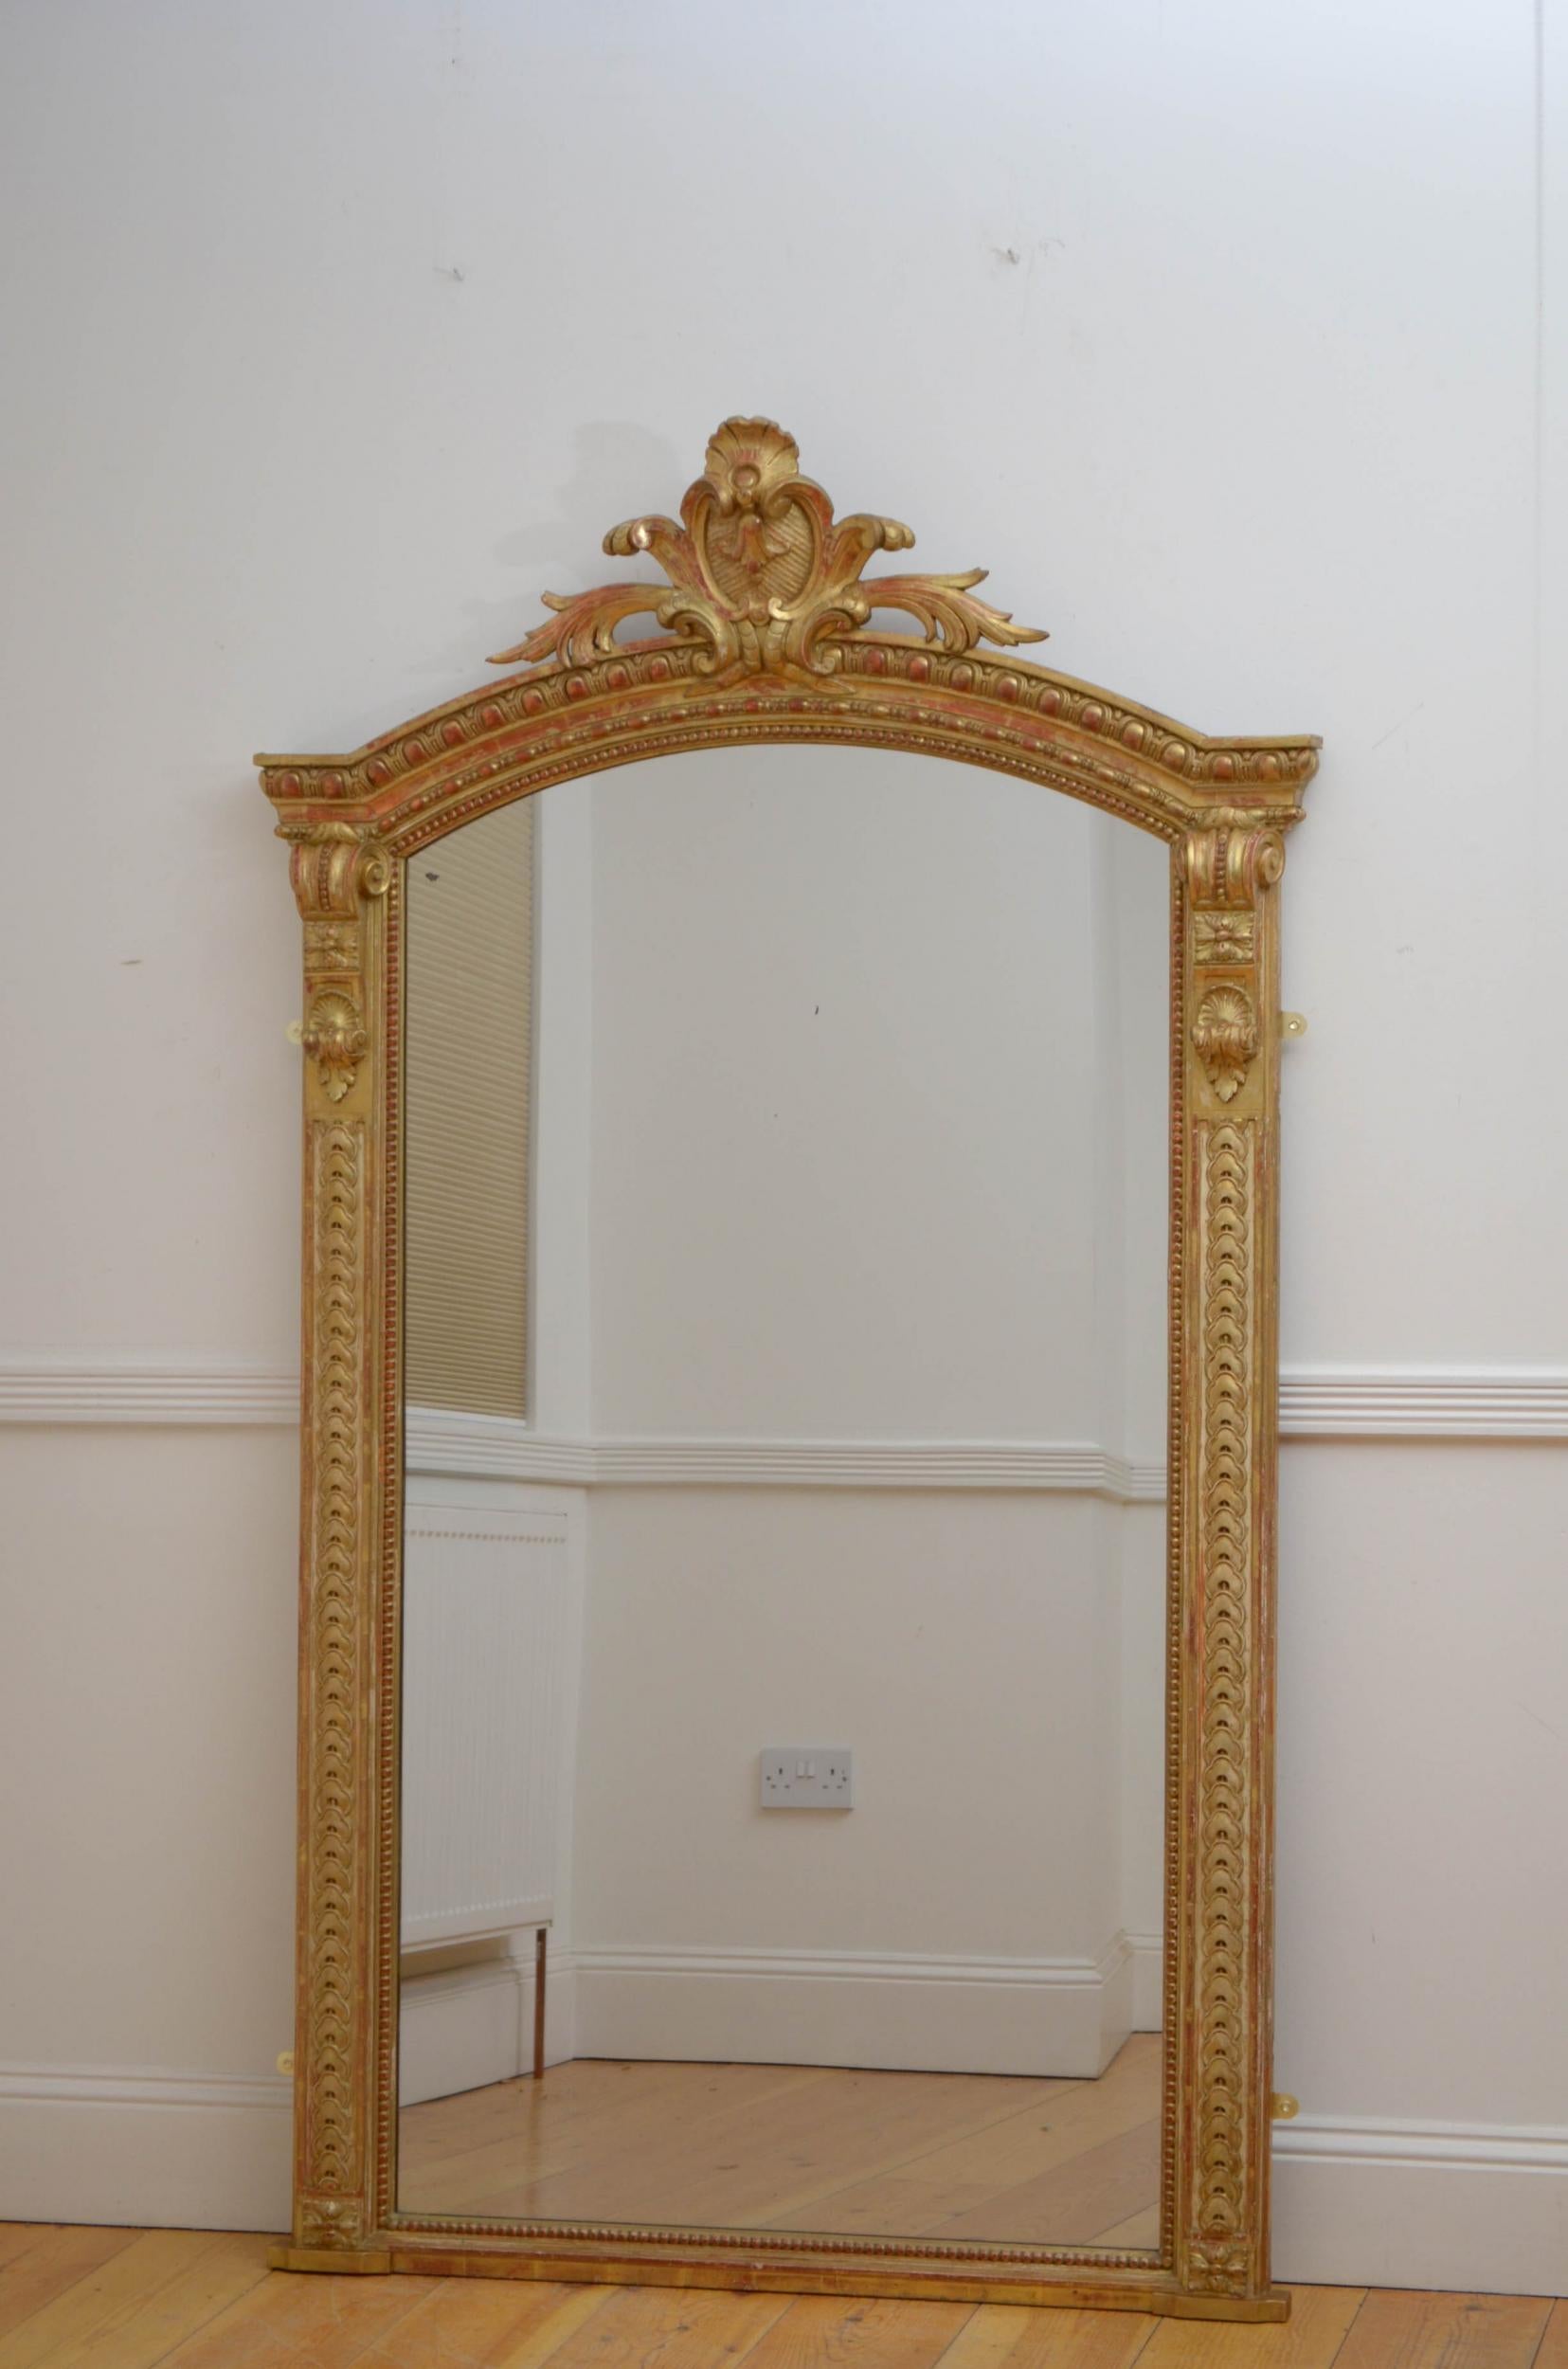 Sn4993 a tall XIXth century giltwood mirror, having original glass with some imperfections in moulded and carved frame with floral crest to centre flanked by highly decorative drop carvings. This antique mirror retains its original glass, original